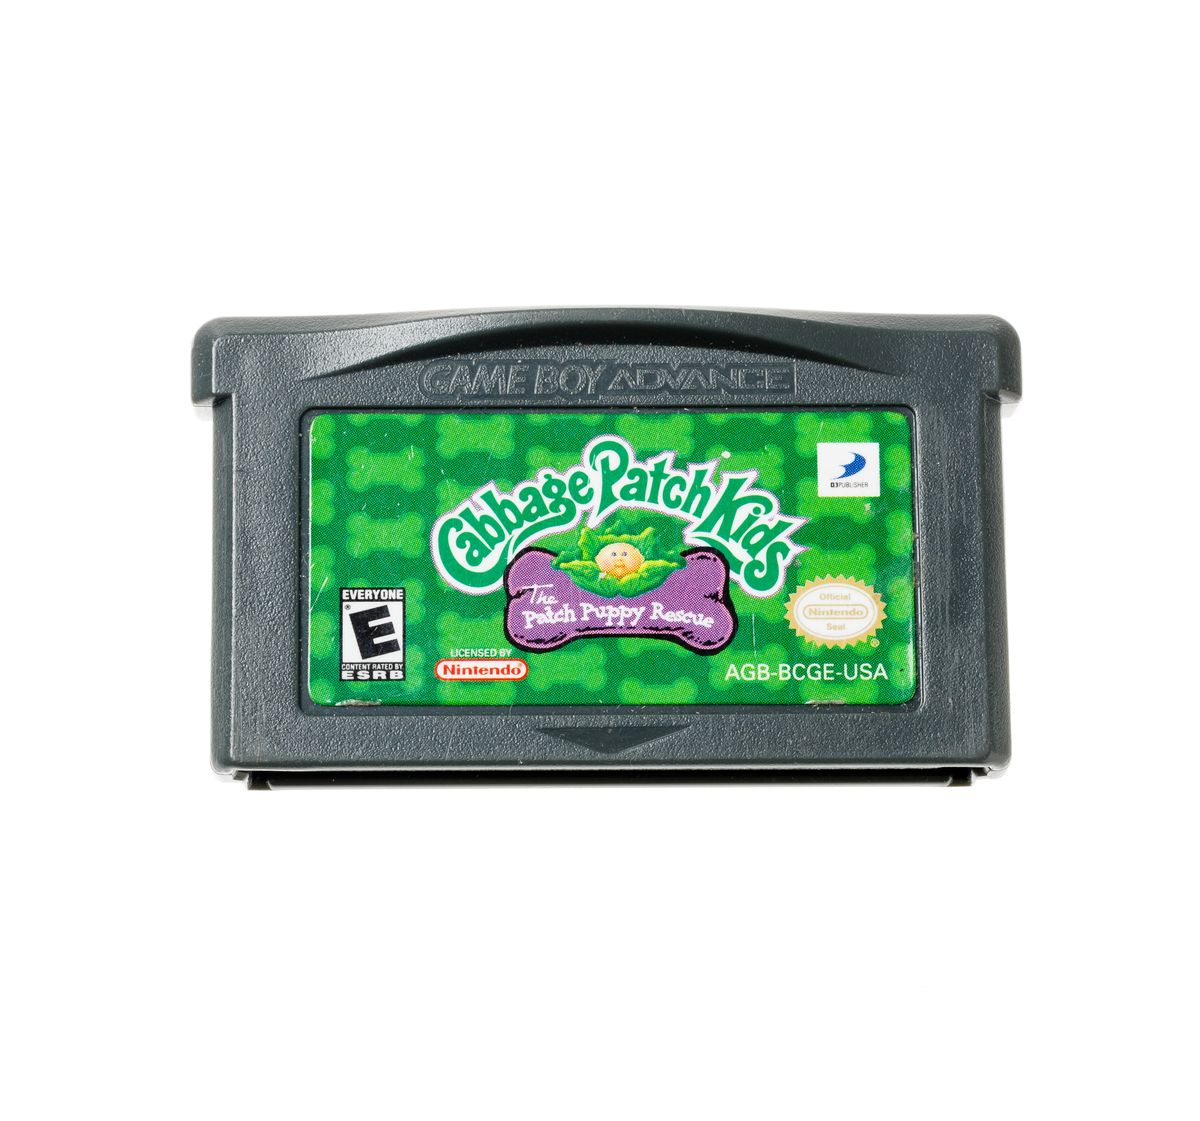 Cabbage Patch Kids - Gameboy Advance Games